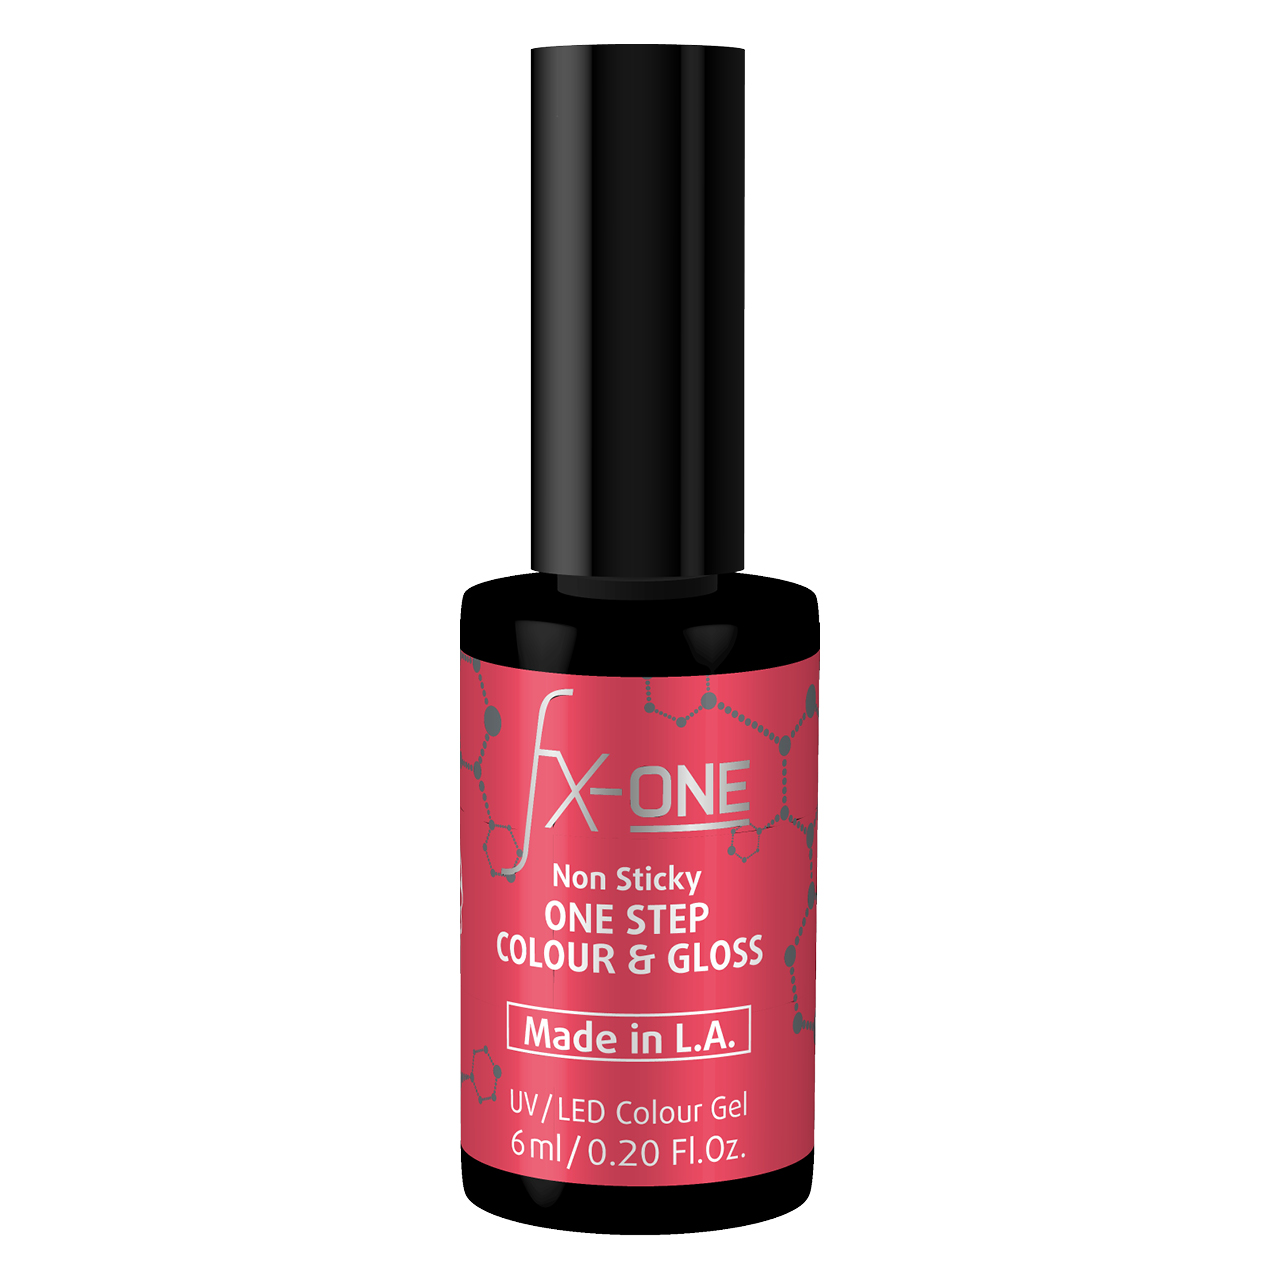 Fx-one Colour & Gloss Made In L. A. 6 Ml